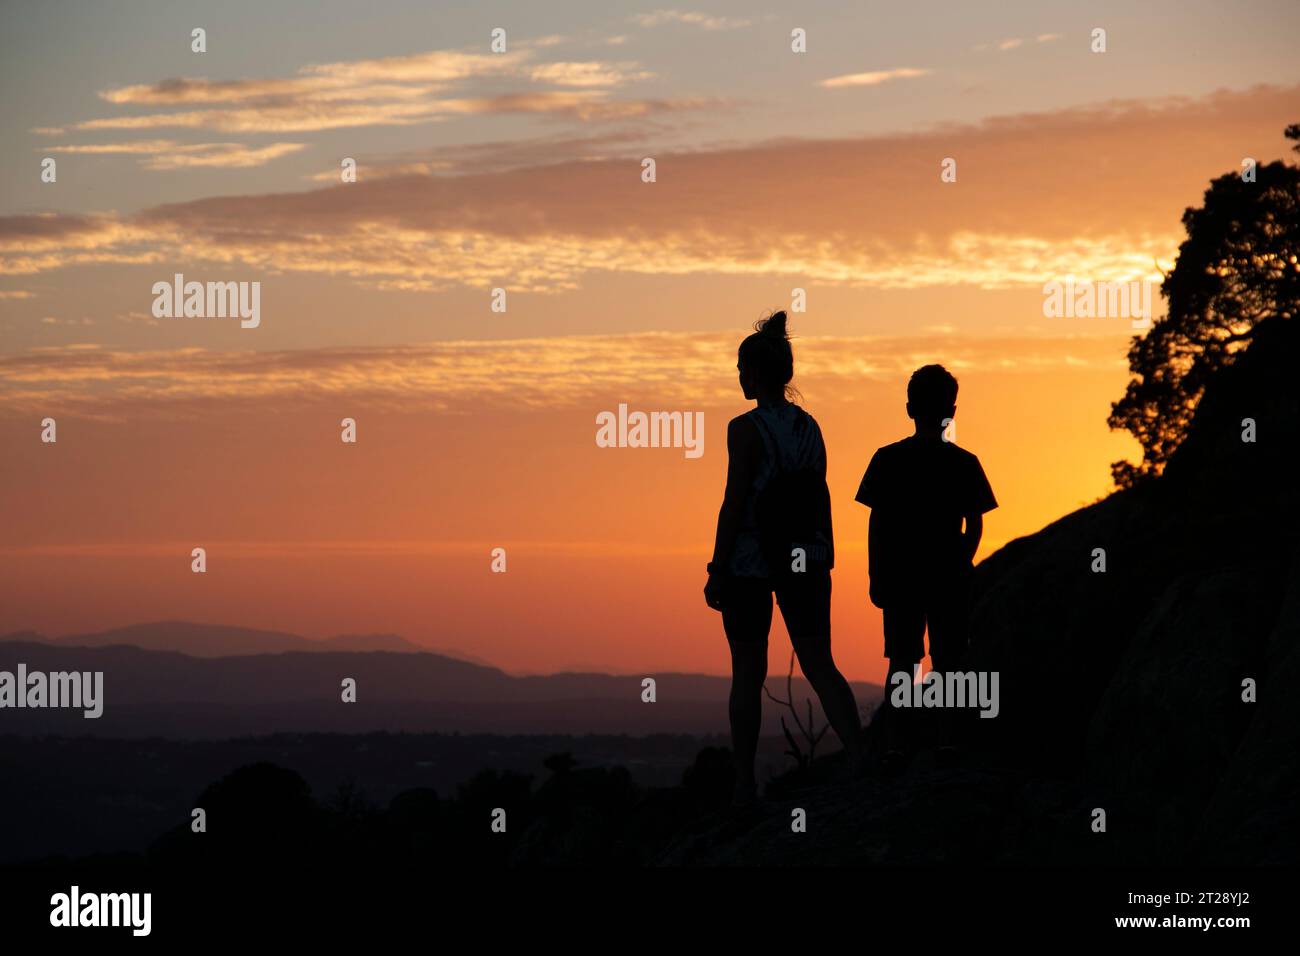 Silhouettes of a single-parent family on a sunset in the mountains Stock Photo